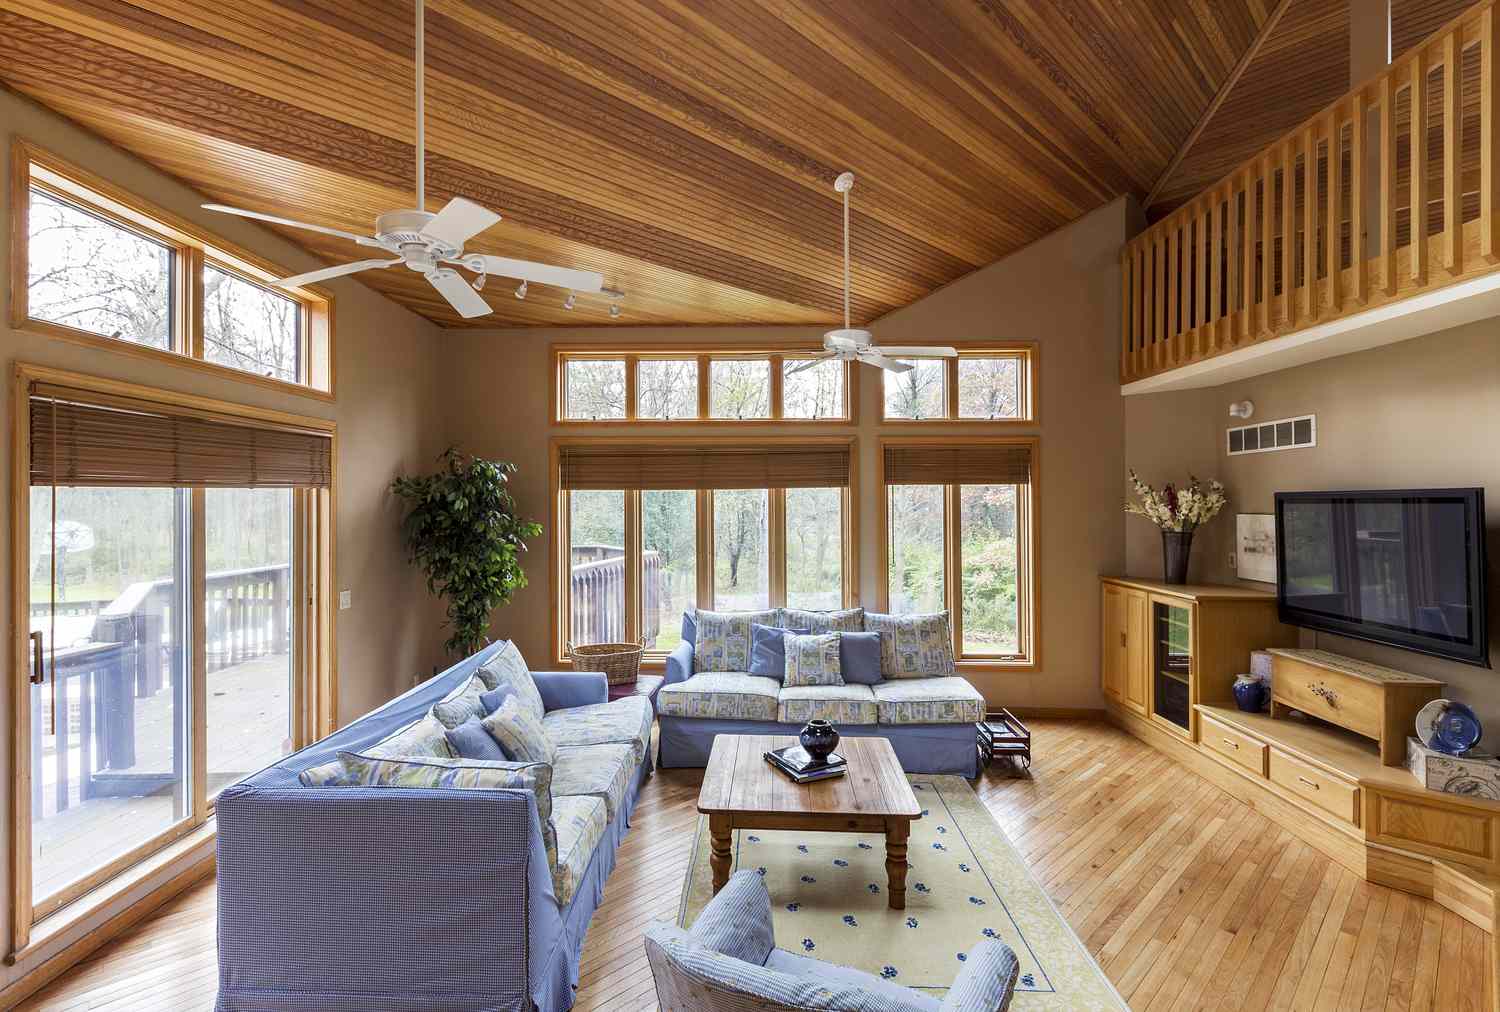 Ceiling Fans for Improved Air Circulation